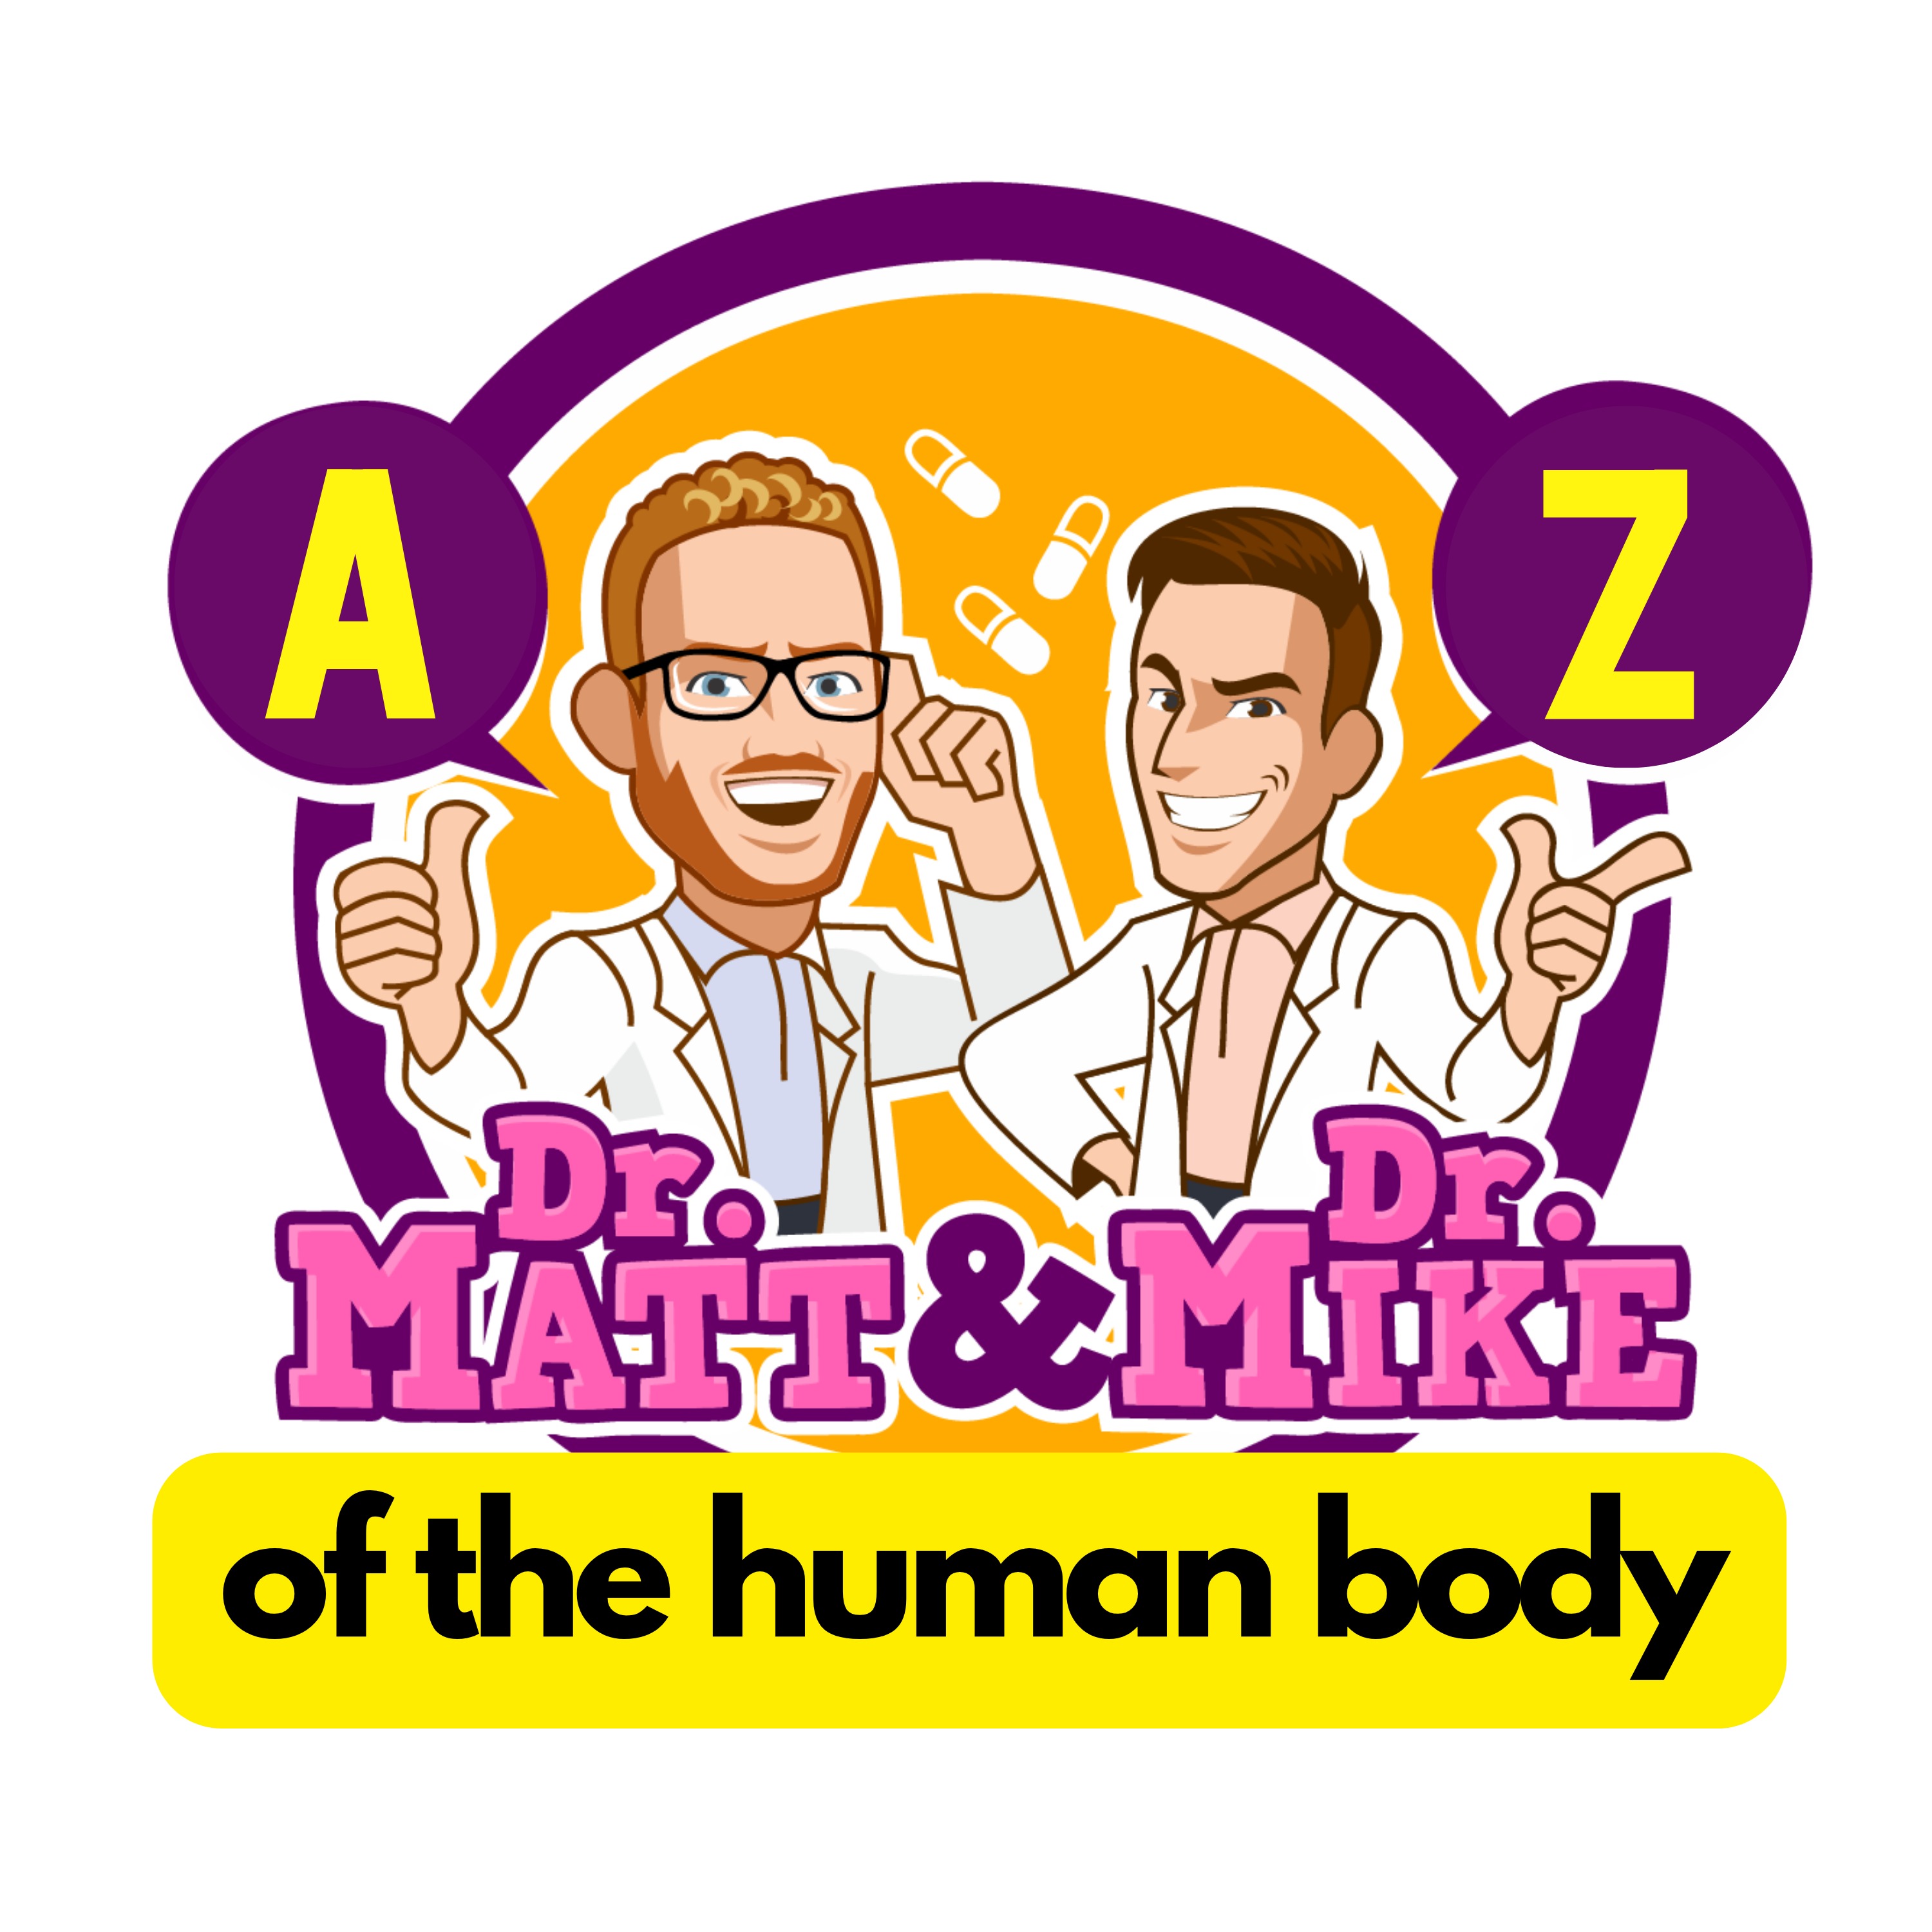 Aconitase | A-Z of the Human Body